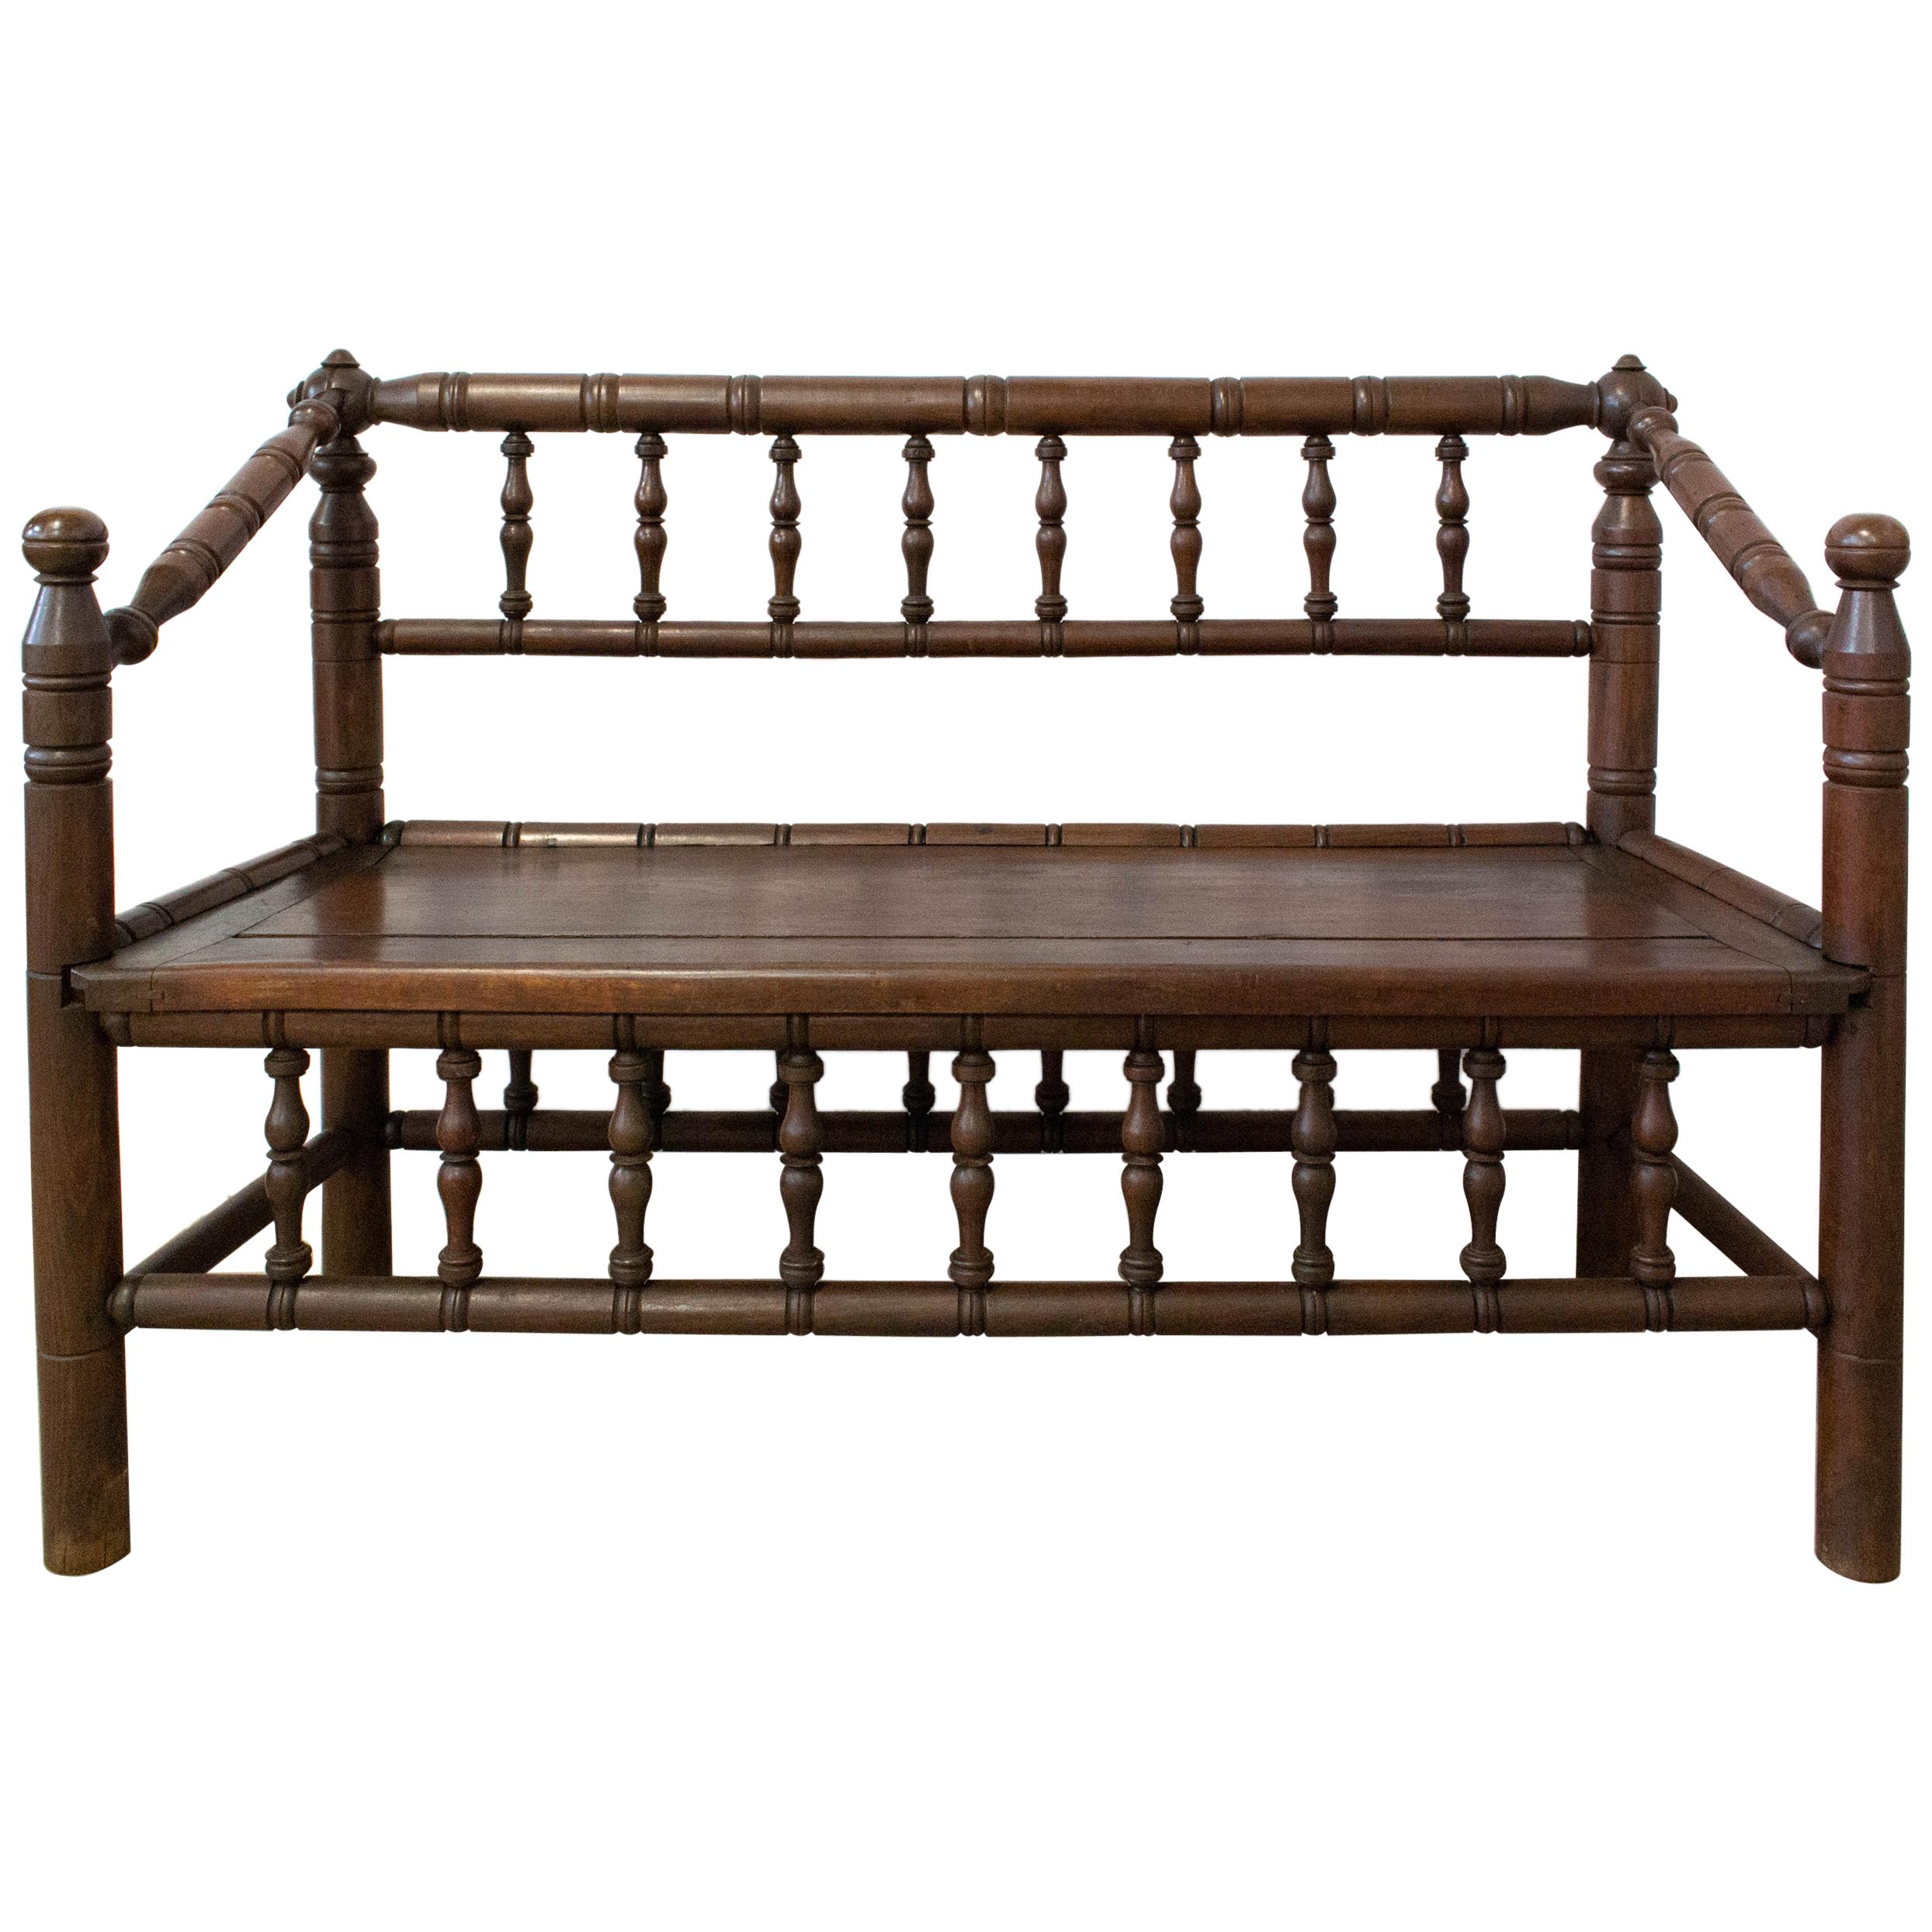 20th Century Bench in Turner's Chairs Style French Provincial Baluster Bench For Sale